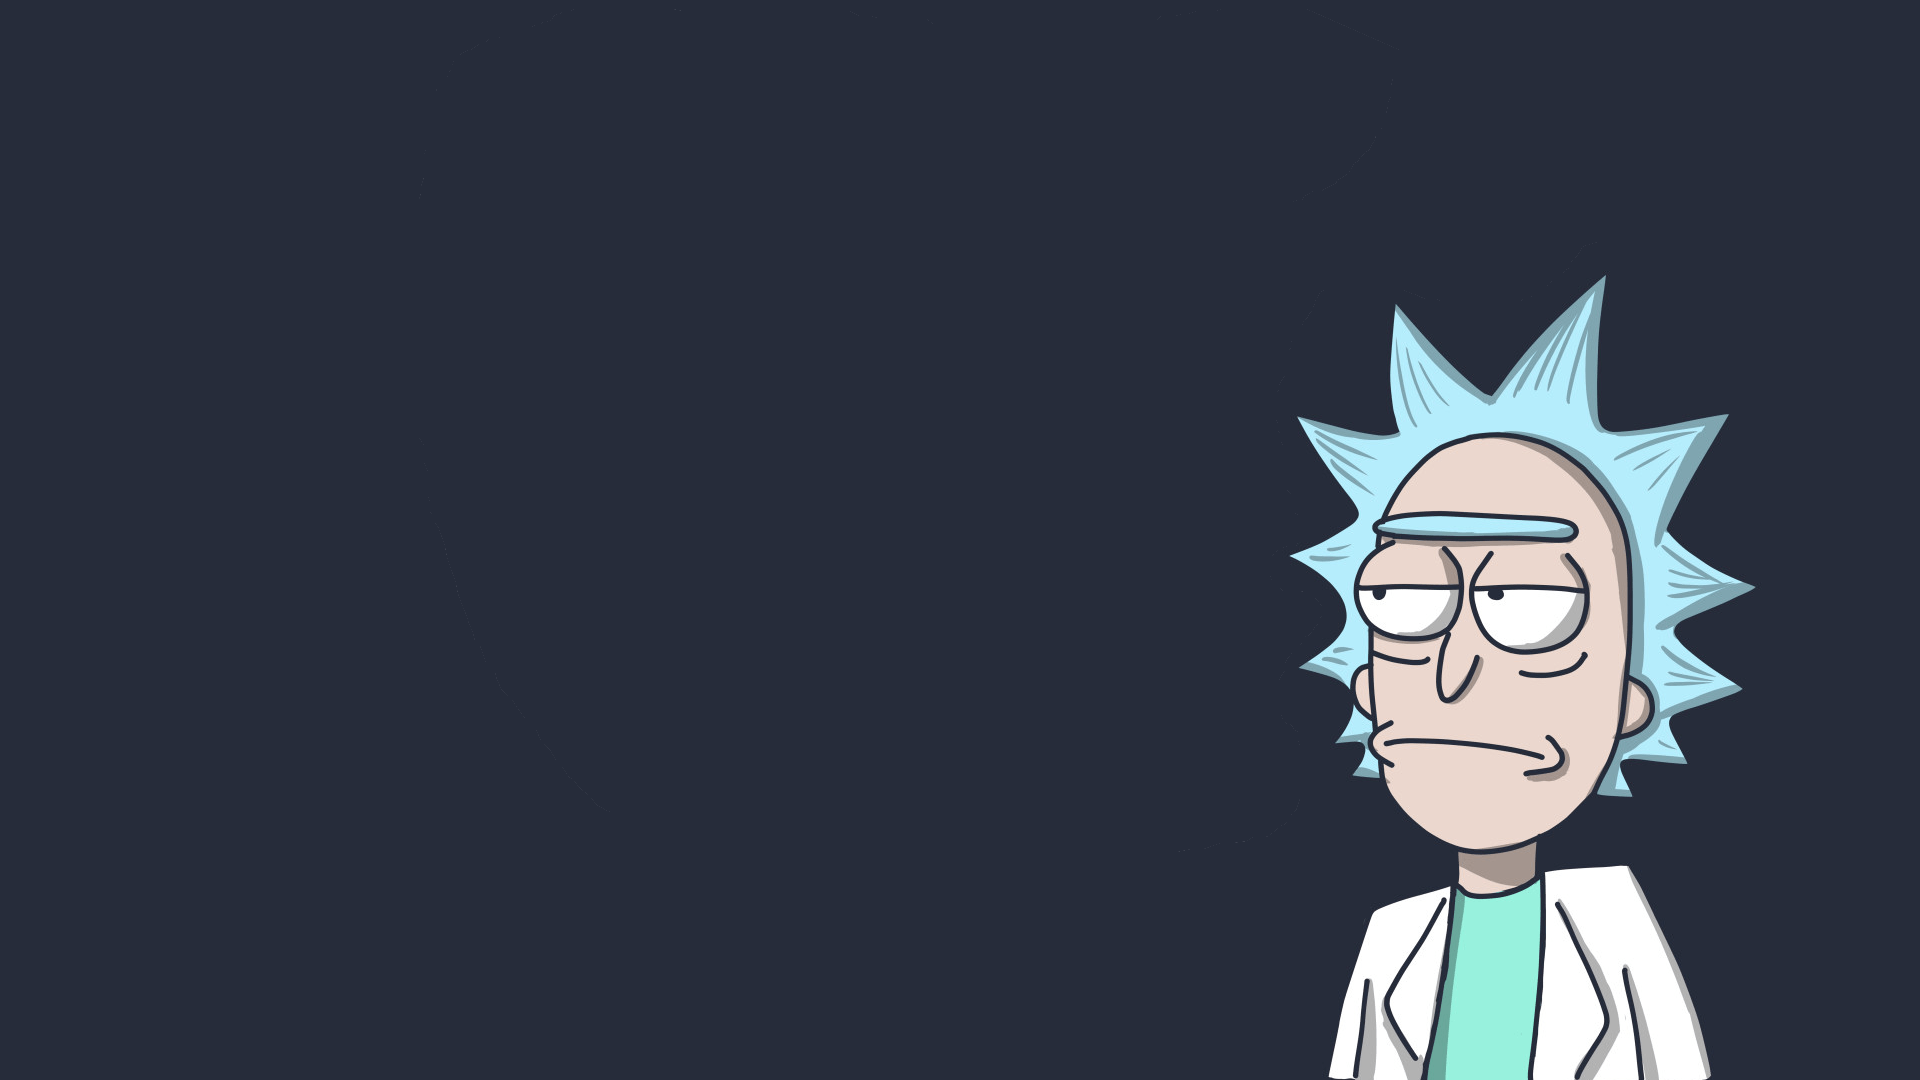 50+ 1080p Rick and Morty HD Wallpapers (2020) HD Backgrounds For Computer -  We 7